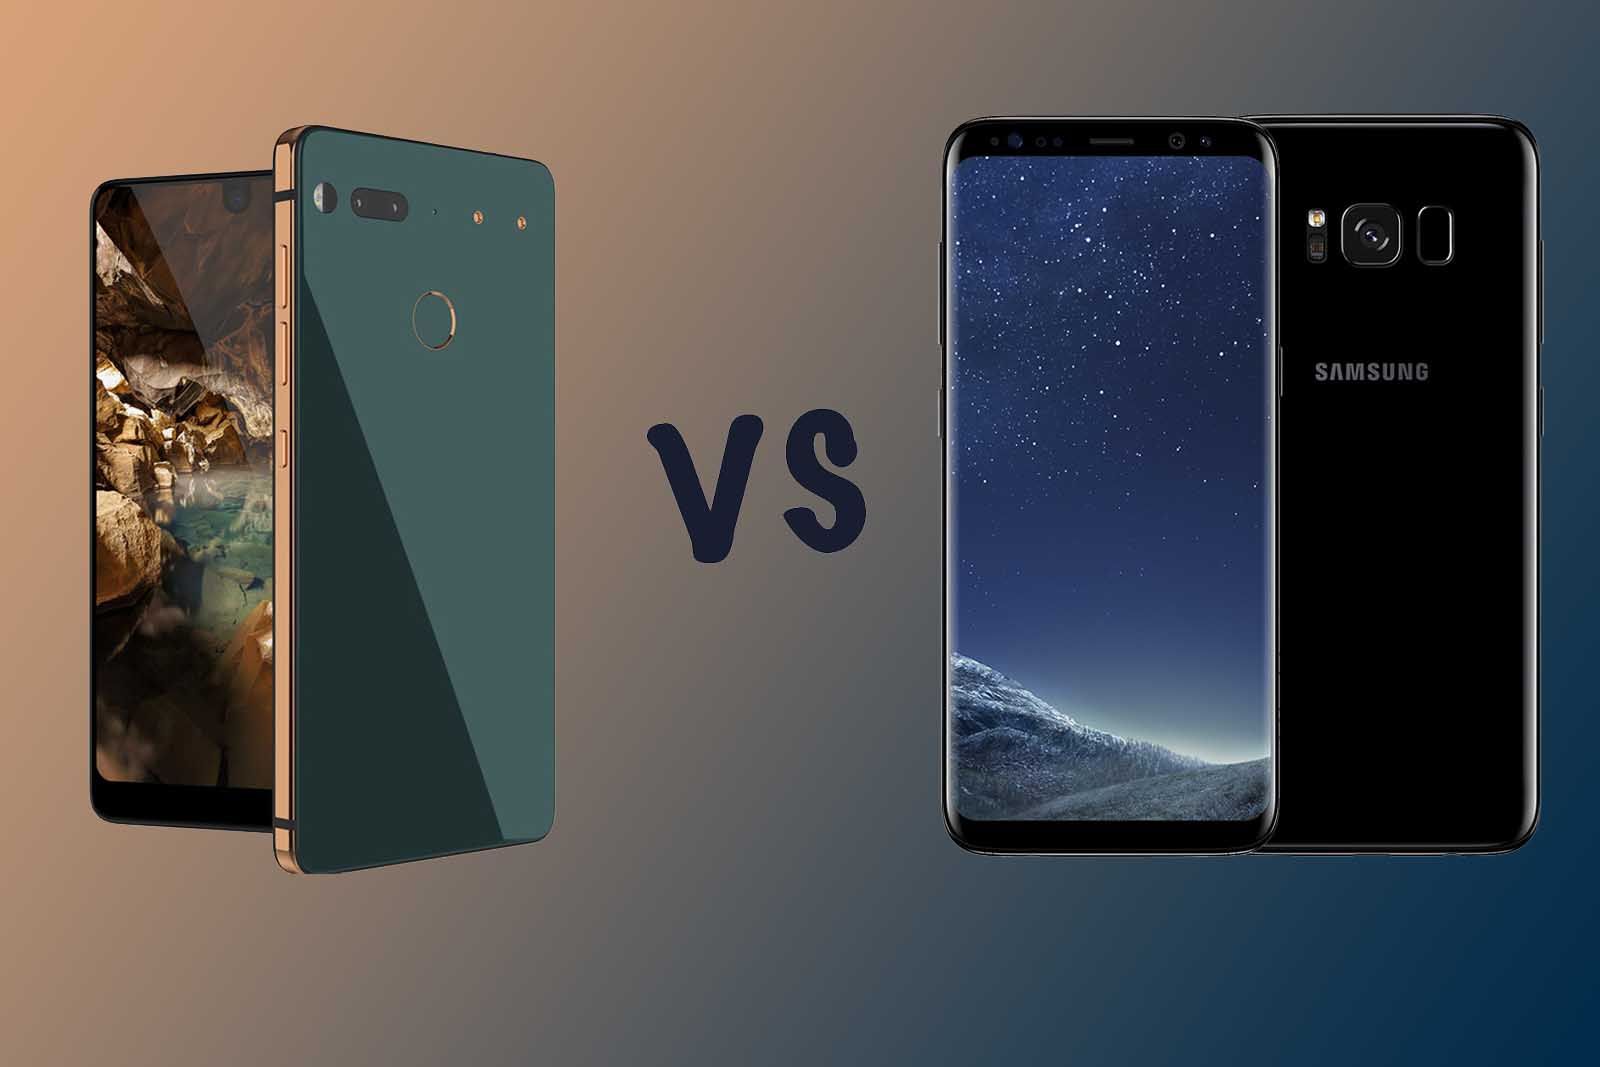 essential phone ph 1 vs samsung galaxy s8 vs s8 what s the difference image 1